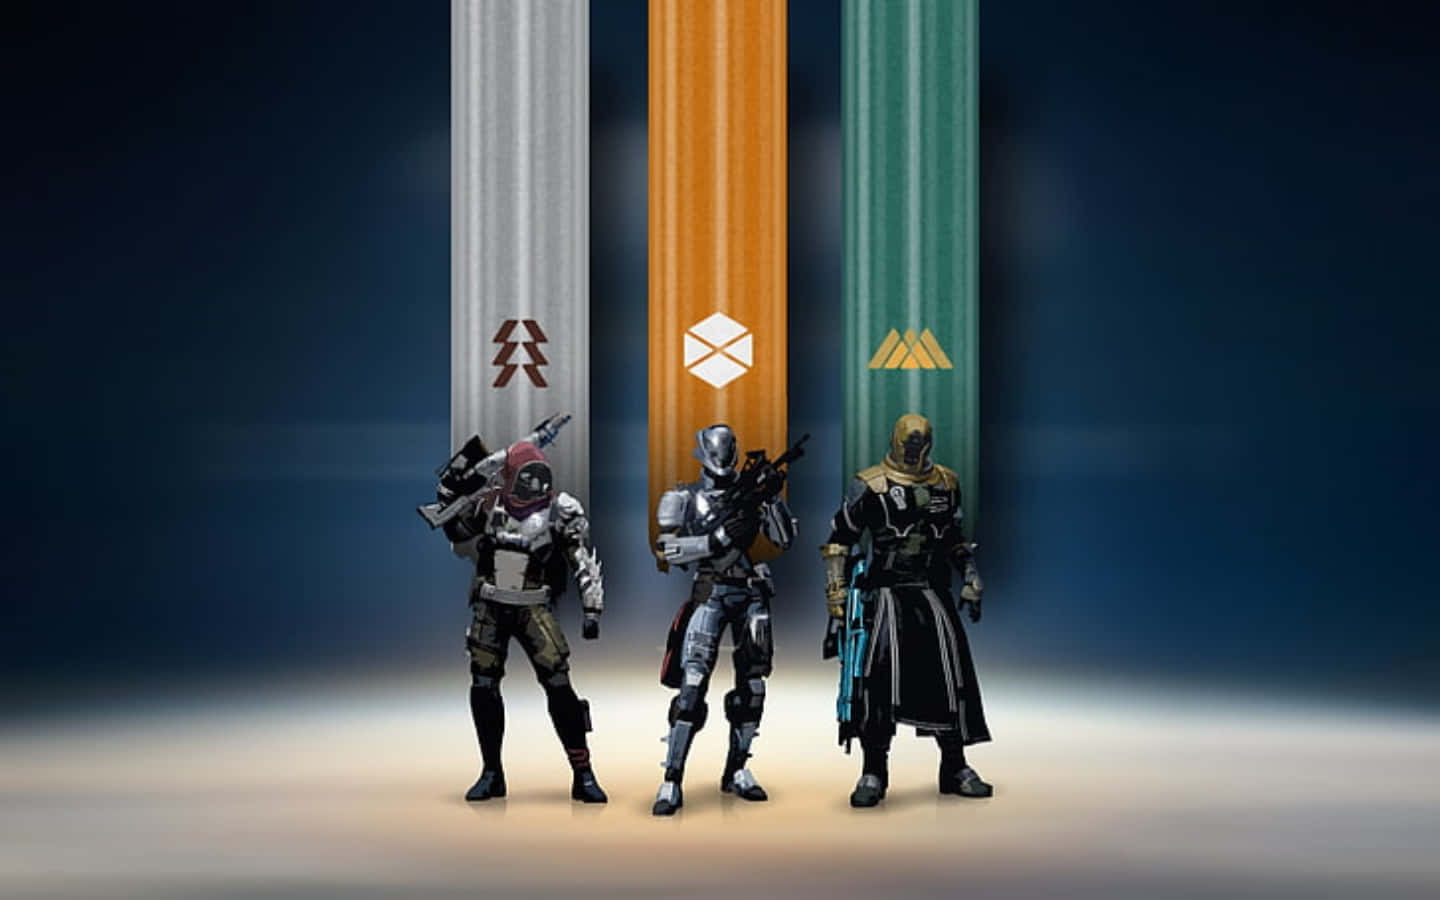 Group of Guardians in action in Destiny Wallpaper